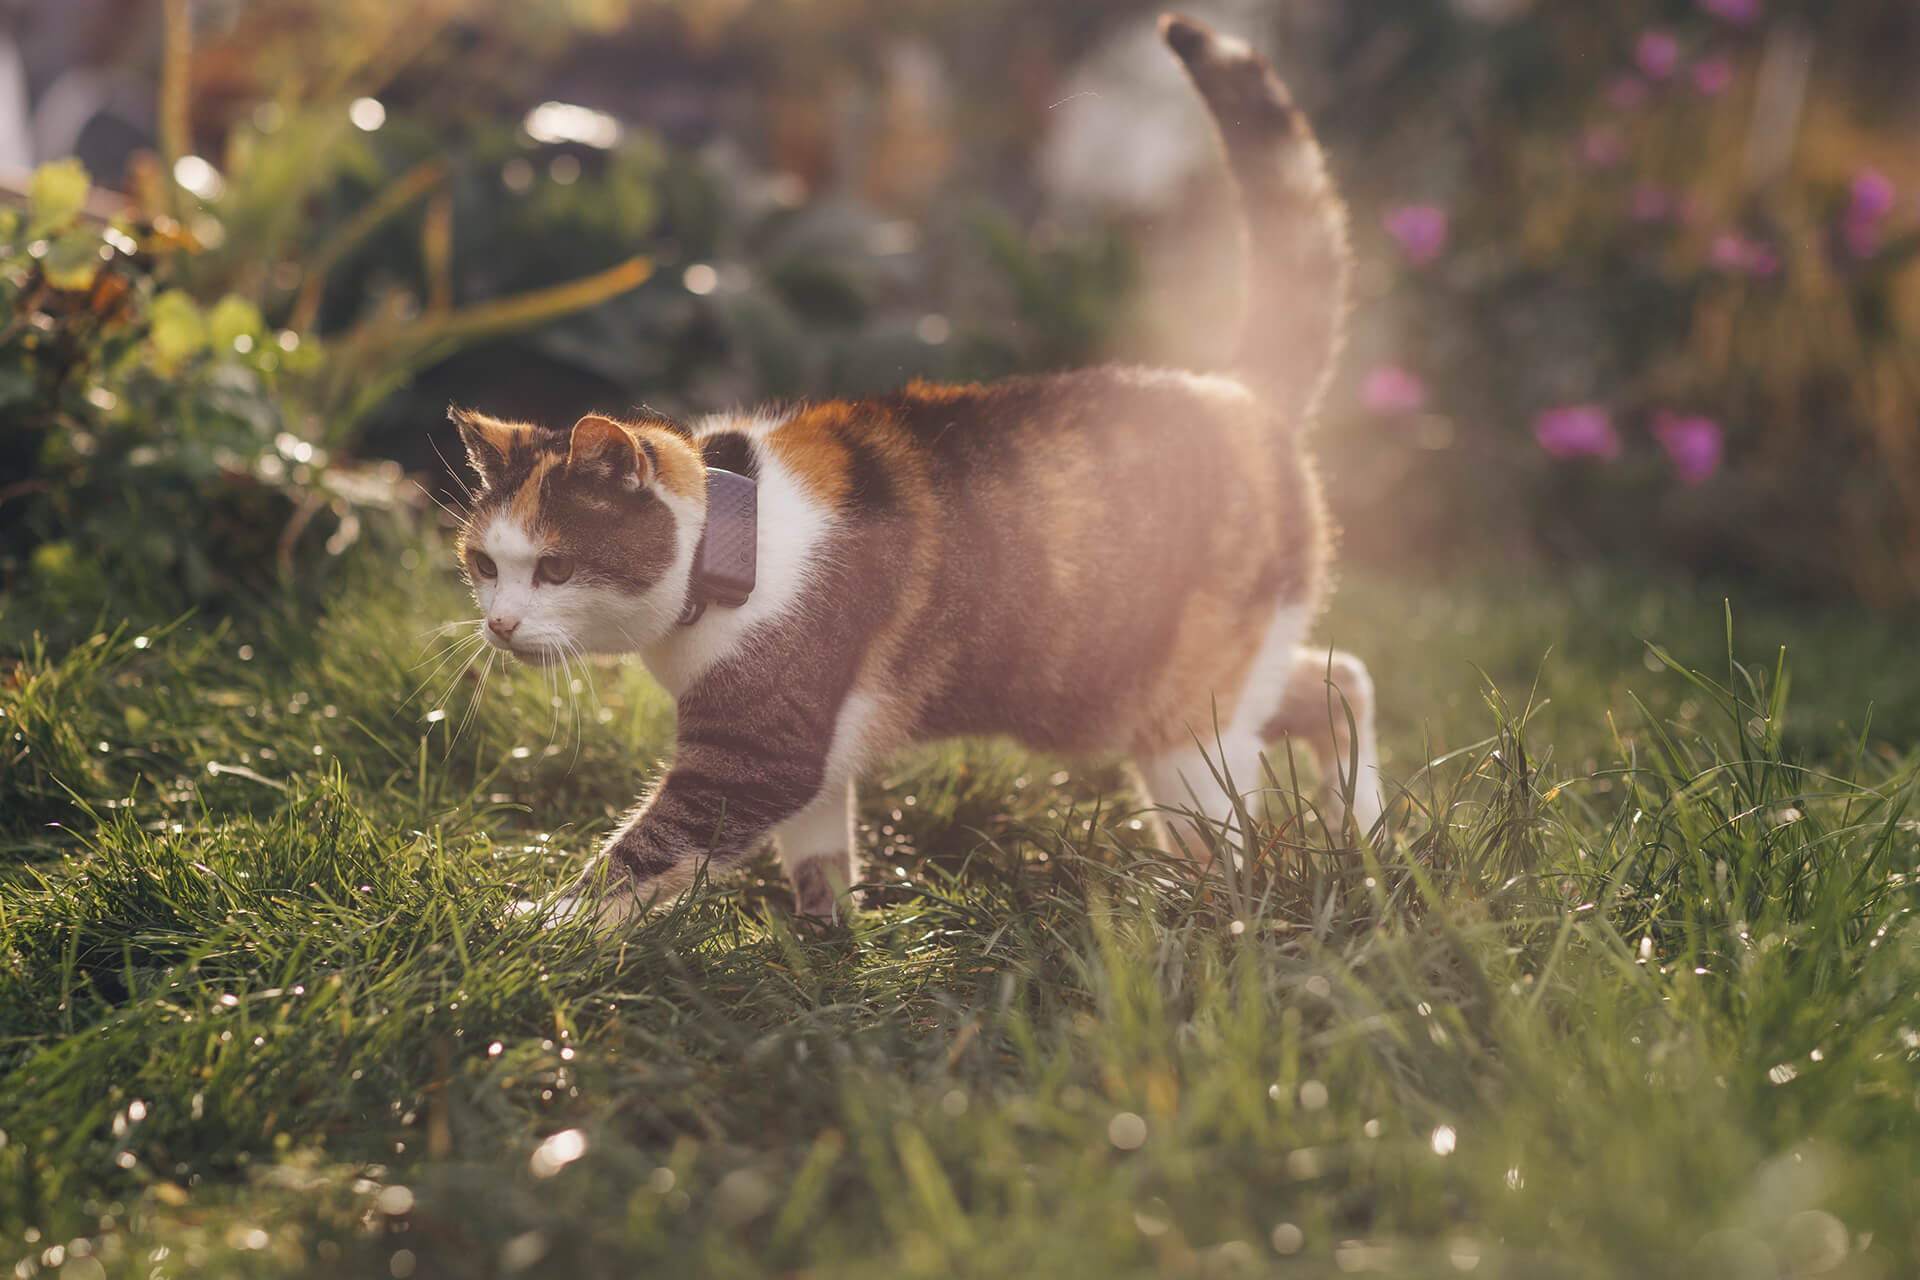 A cat wearing the Tractive GPS tracker wandering outdoors